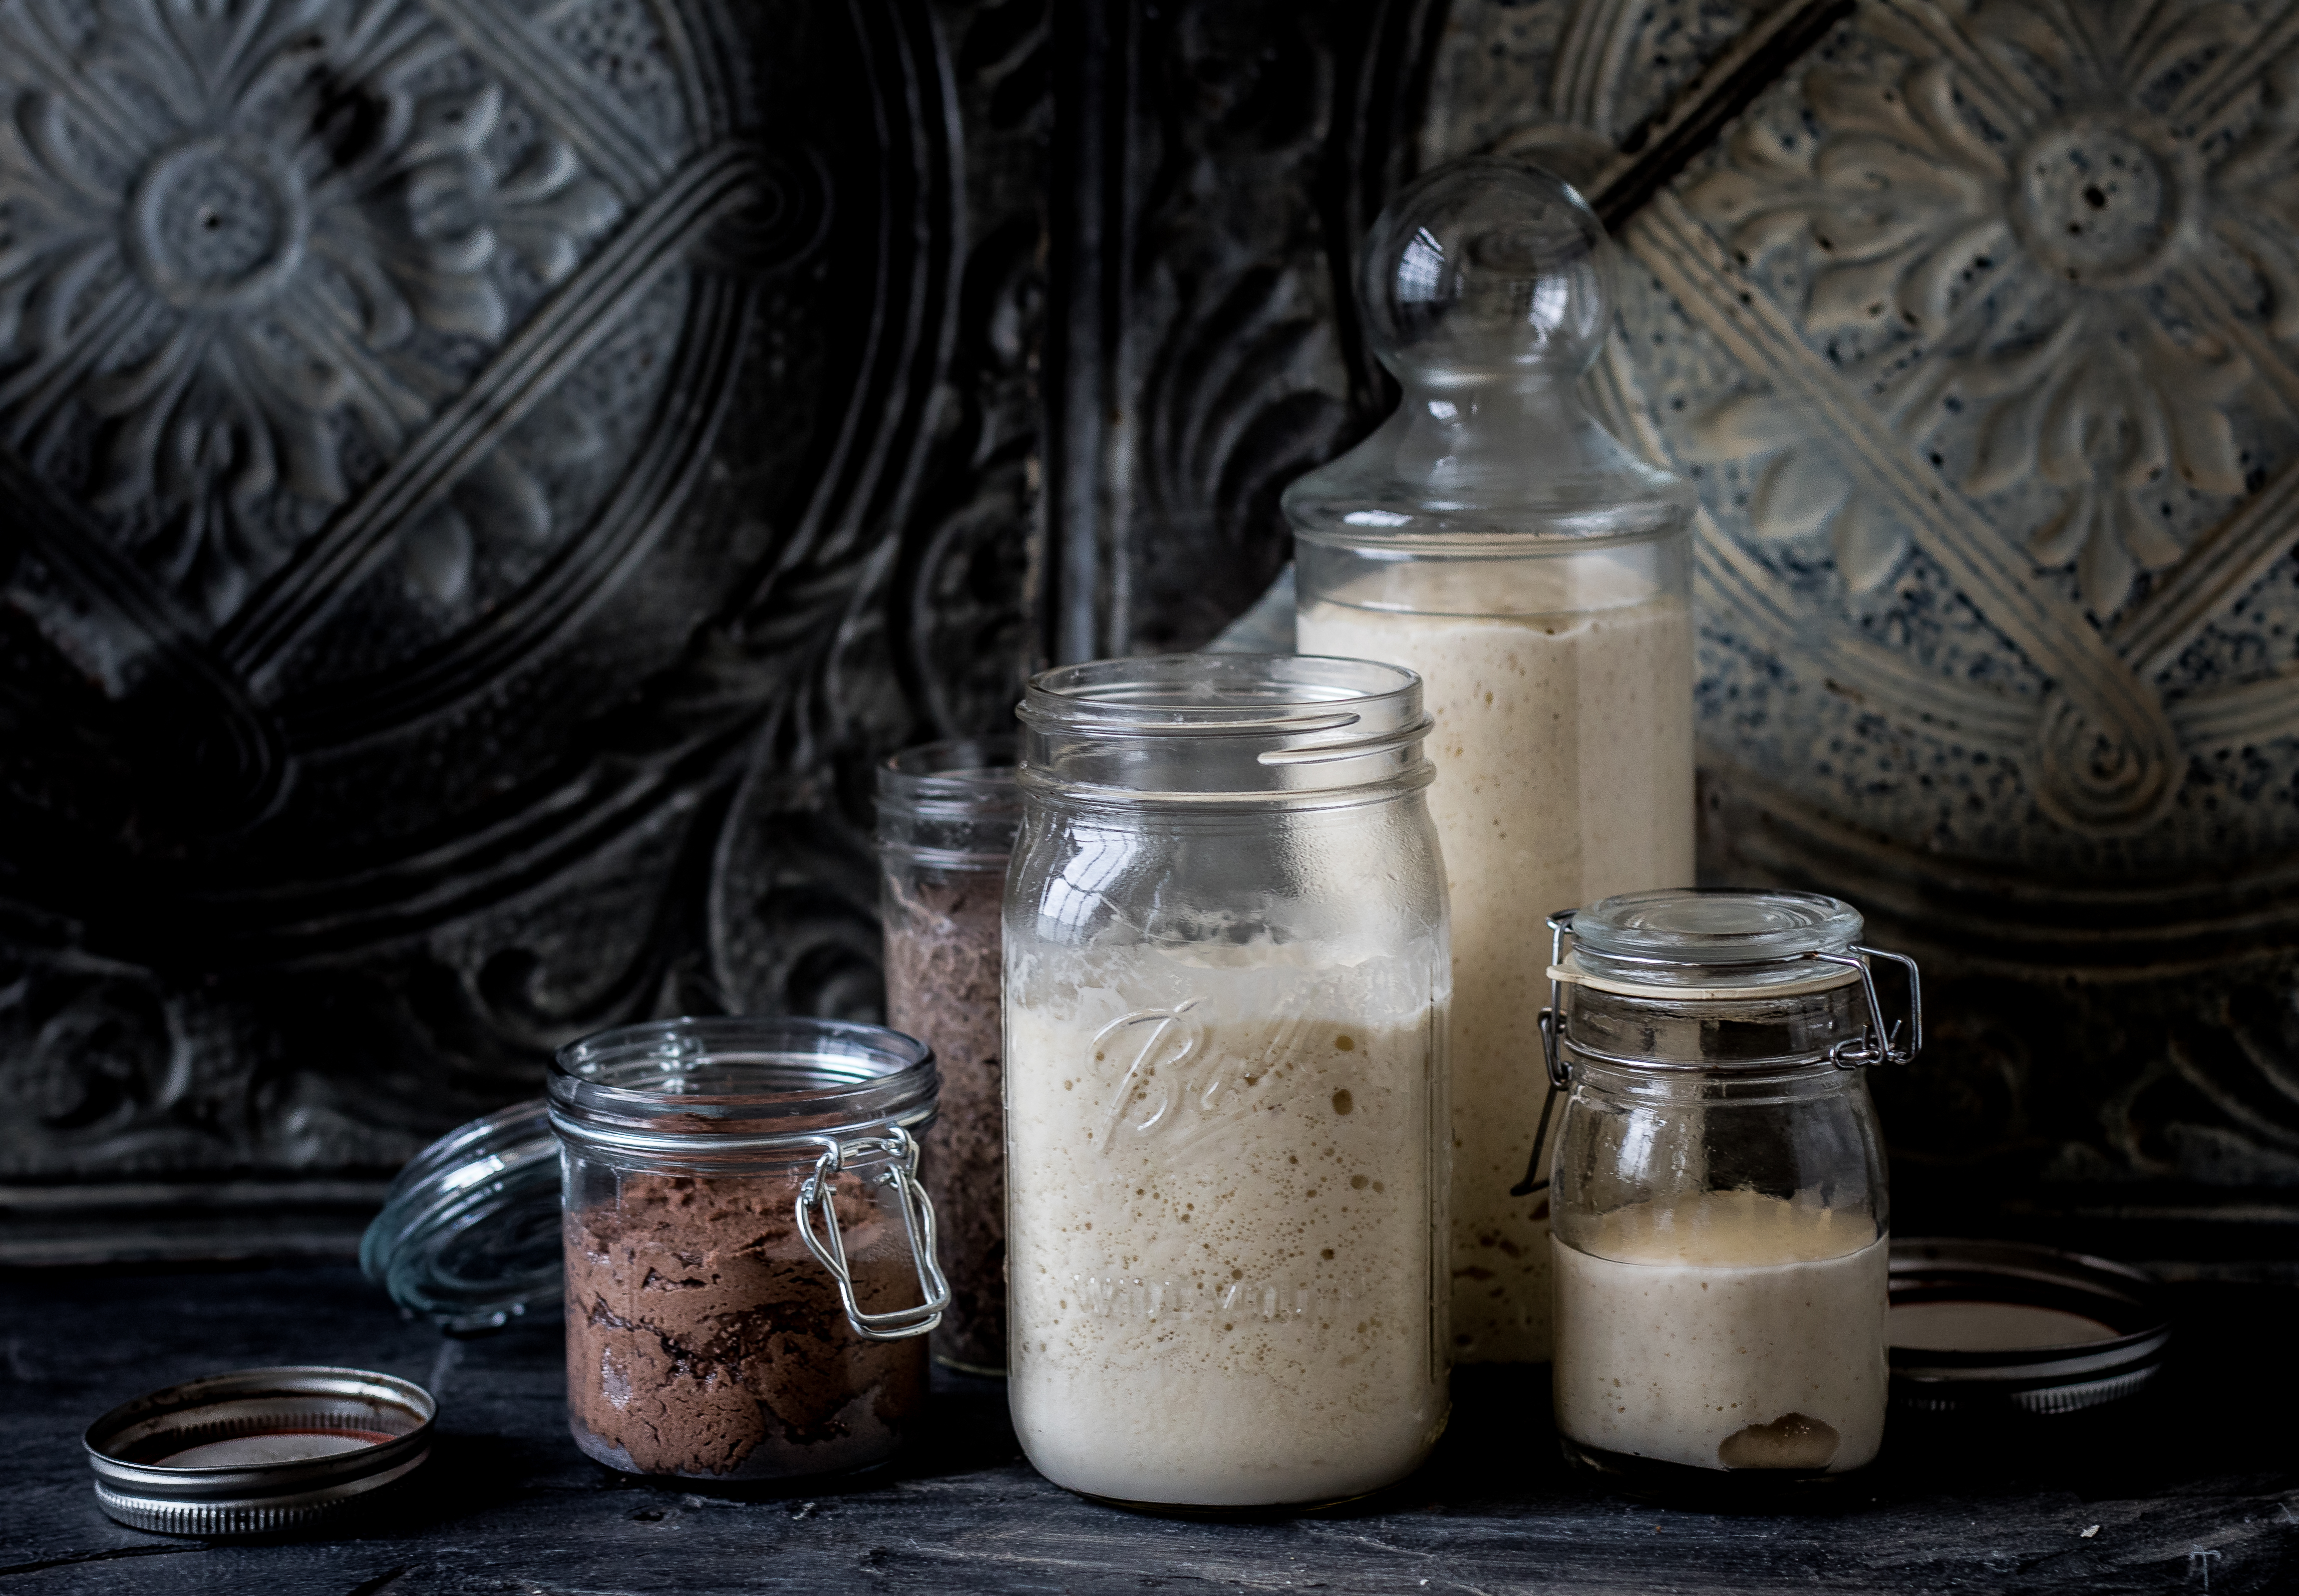 A series of preferments in jars on a table